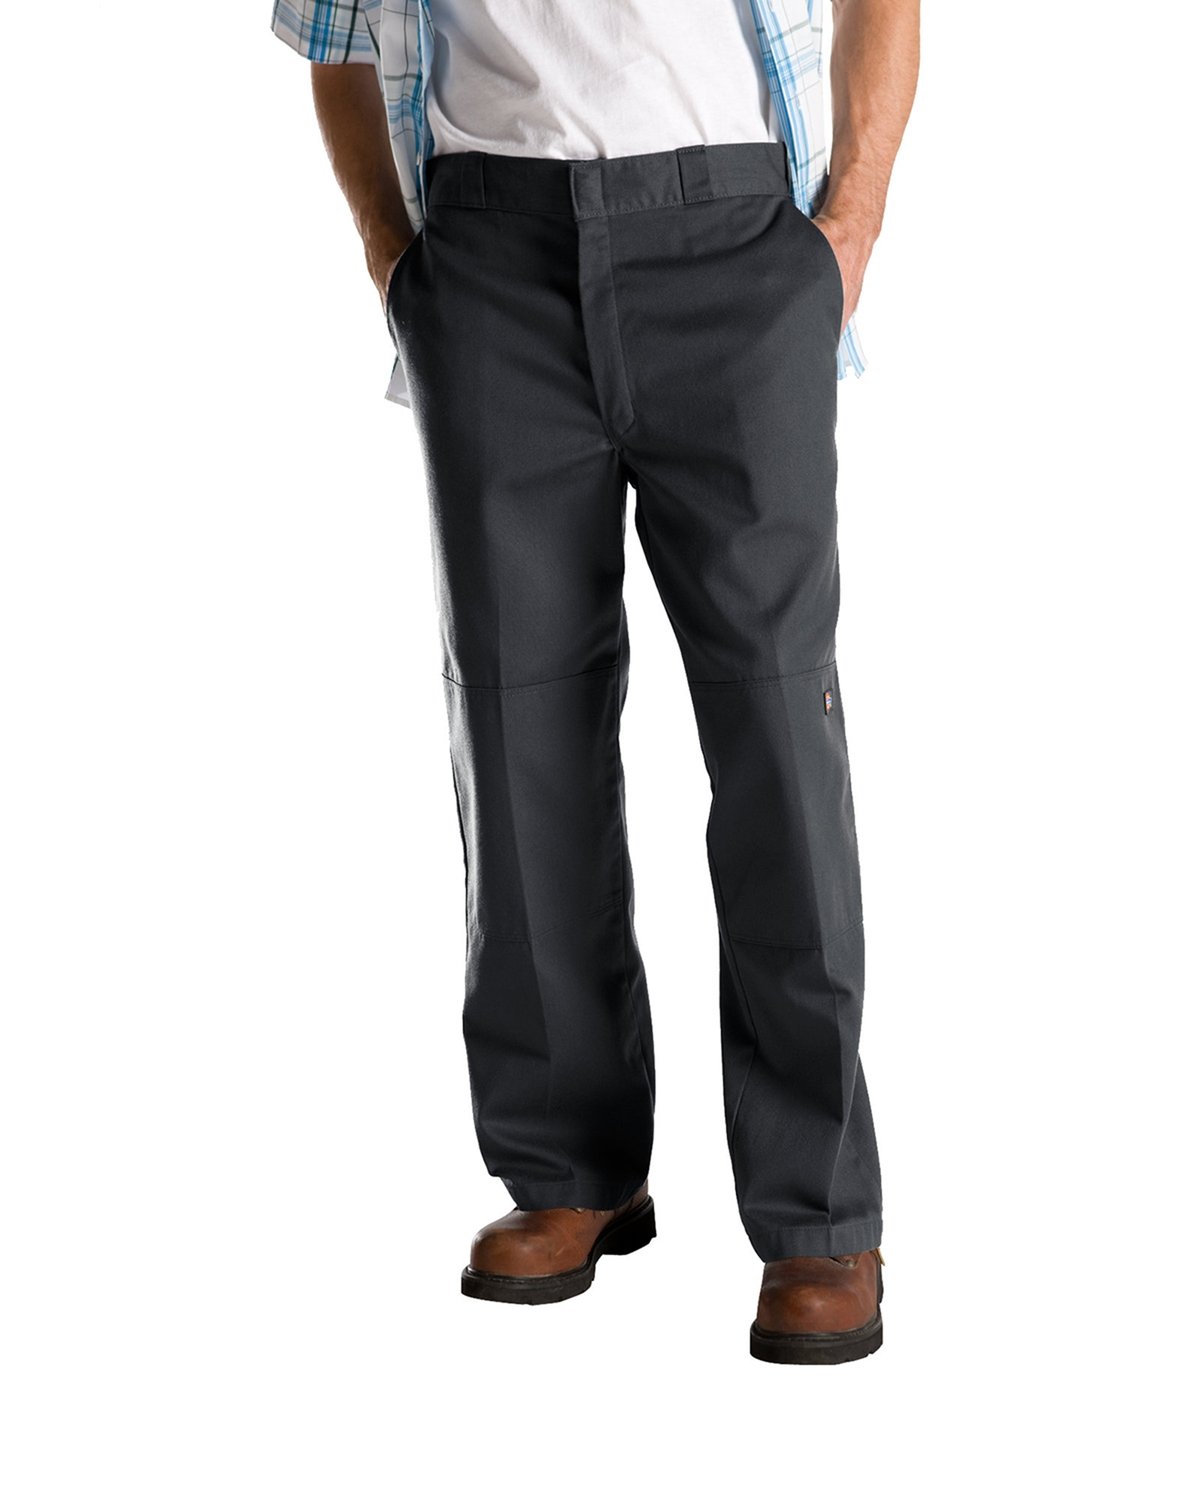 Loose Fit Double Knee Work Pant-